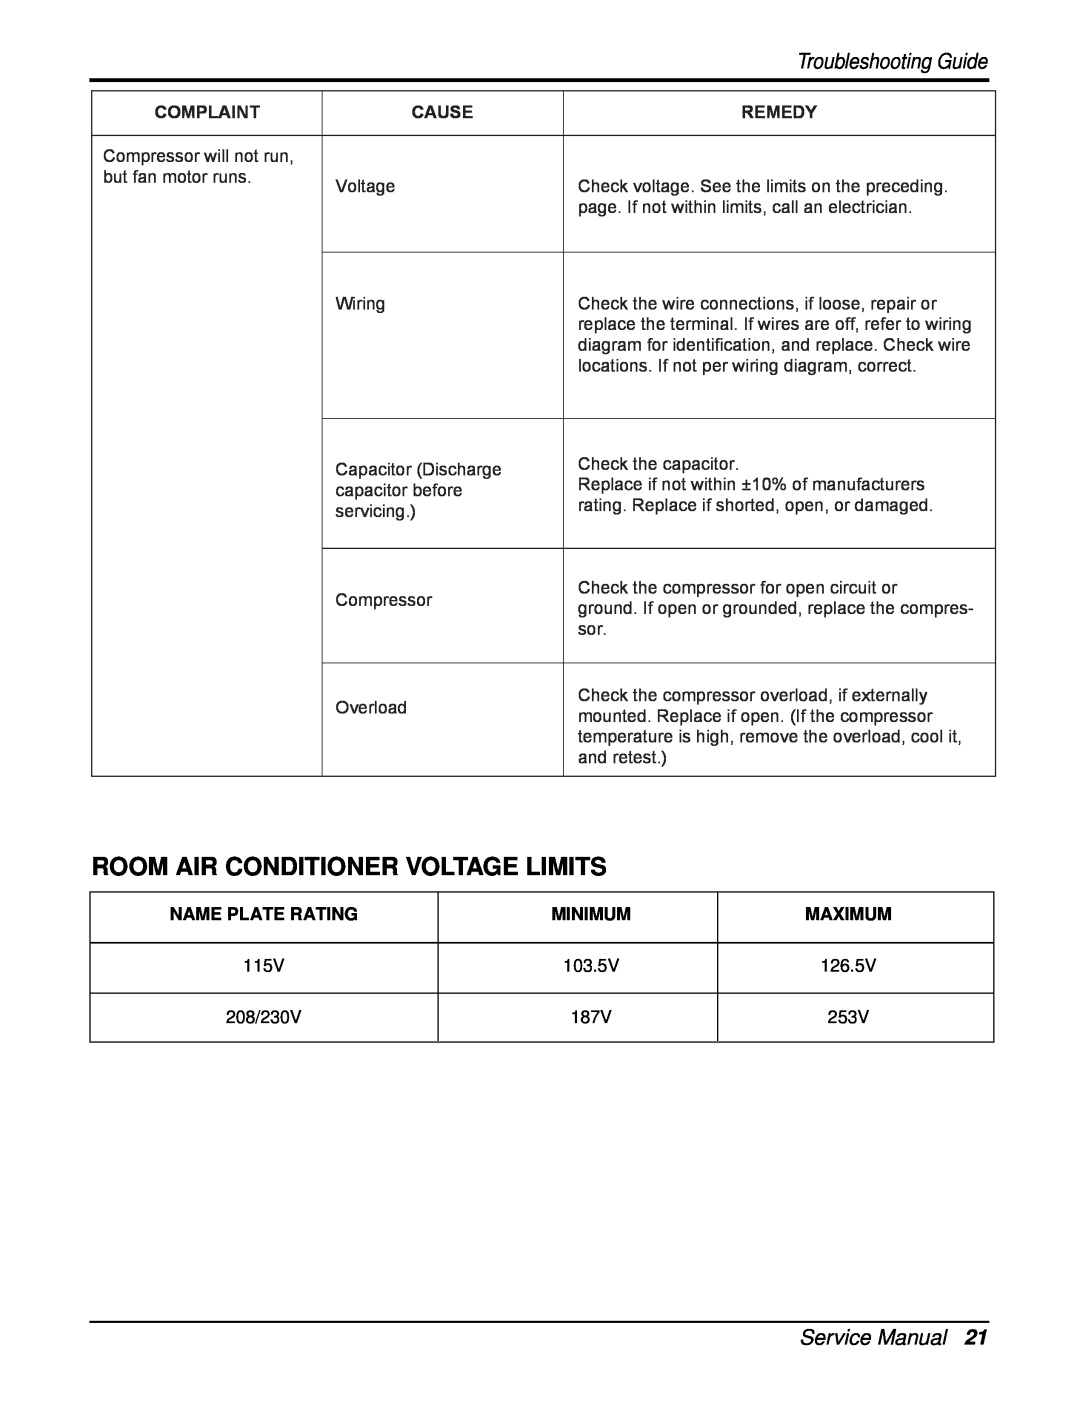 Friedrich UE12C33, UE10C33, UE08C13 Room Air Conditioner Voltage Limits, Troubleshooting Guide, Complaint, Cause, Remedy 